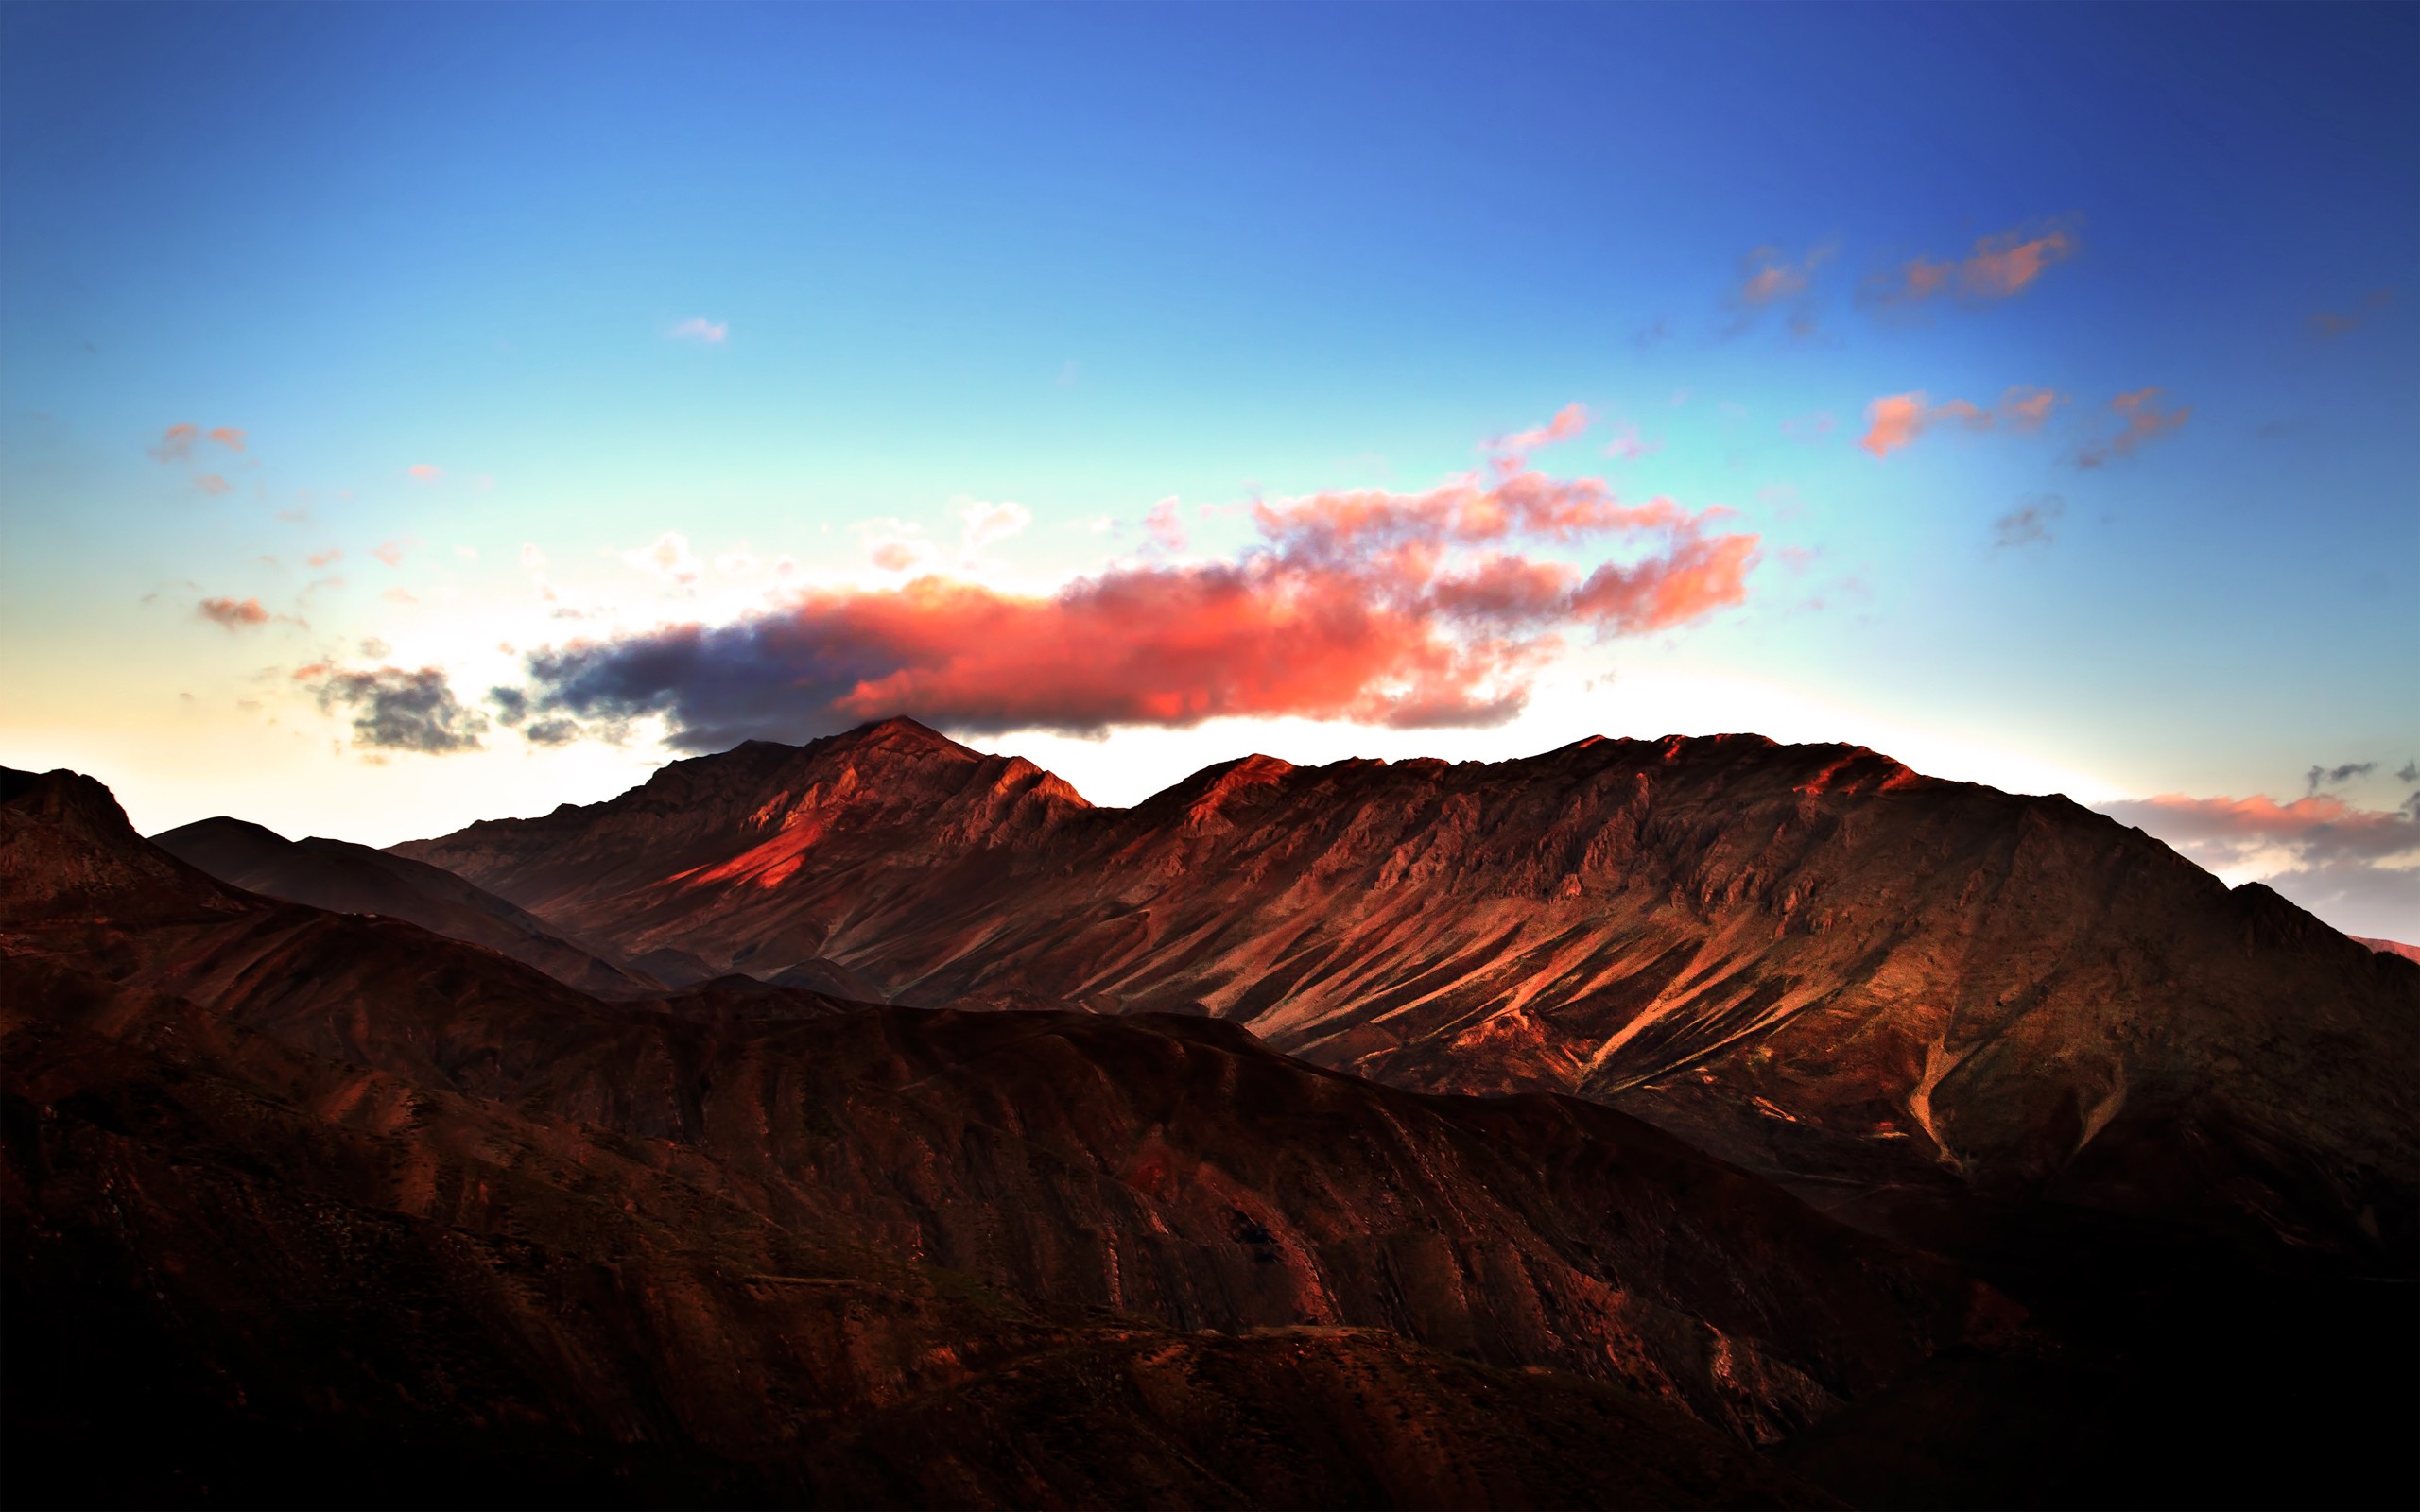 General 2560x1600 mountains nature landscape outdoors valley sunrise morning red orange blue